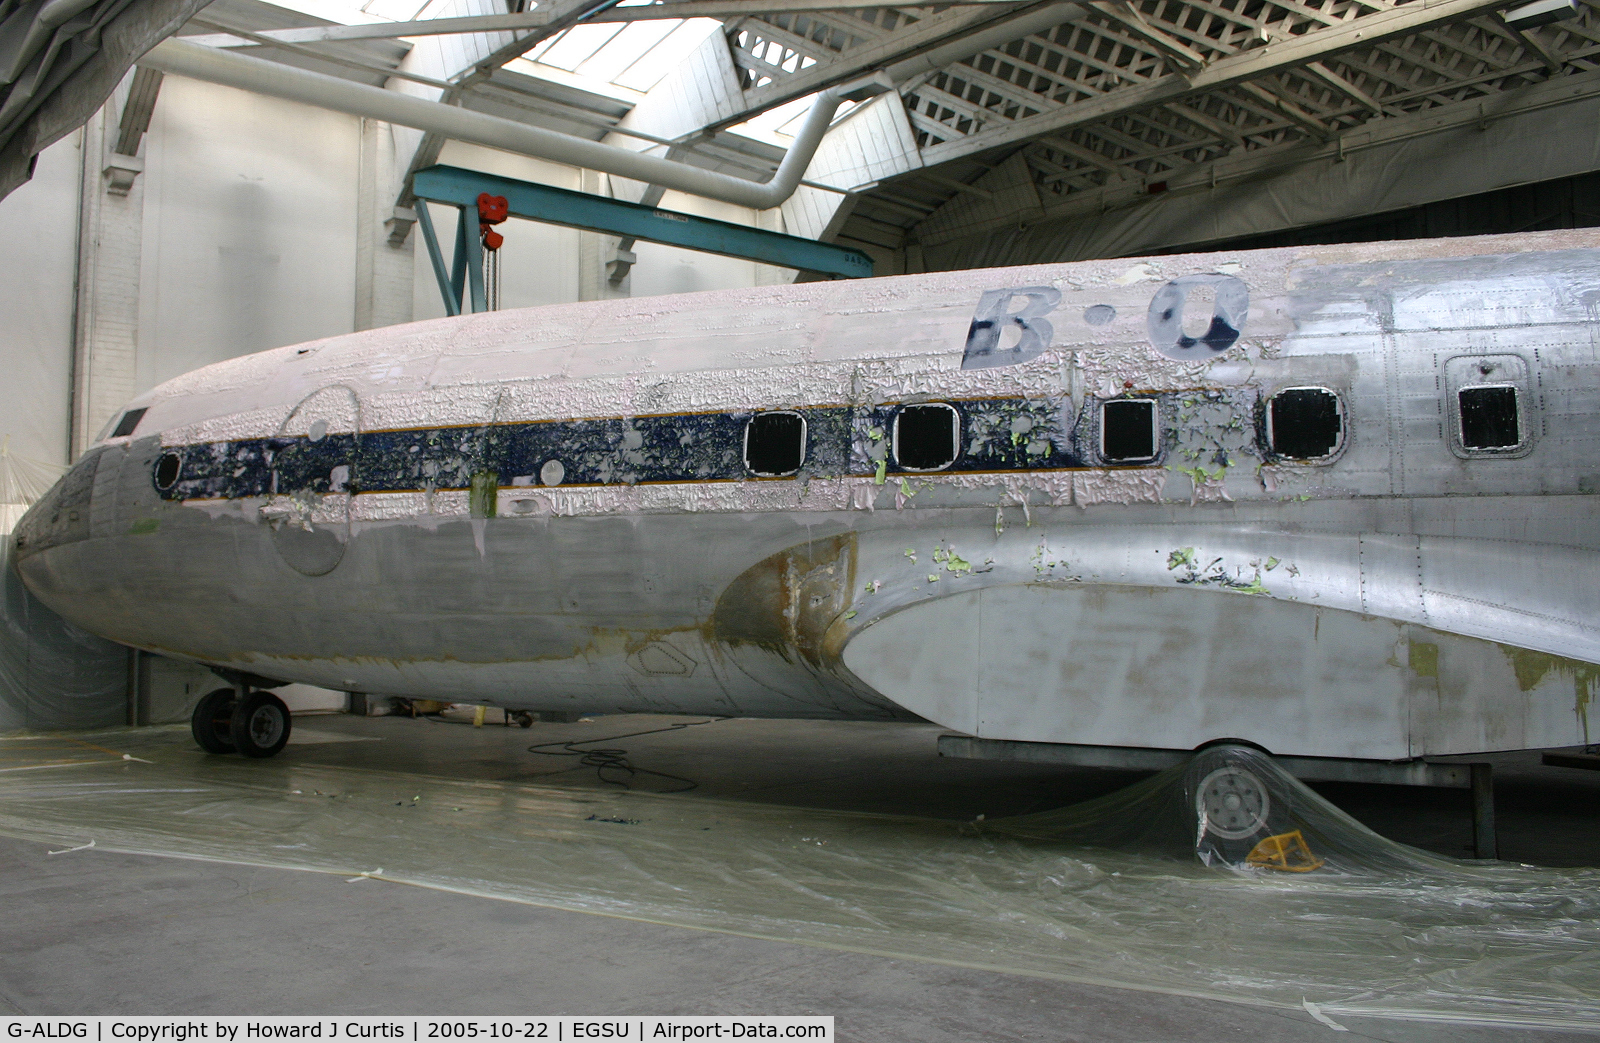 G-ALDG, Handley Page HP.81 Hermes IV C/N 08, Sole surviving example of the type, having its paint stripped.